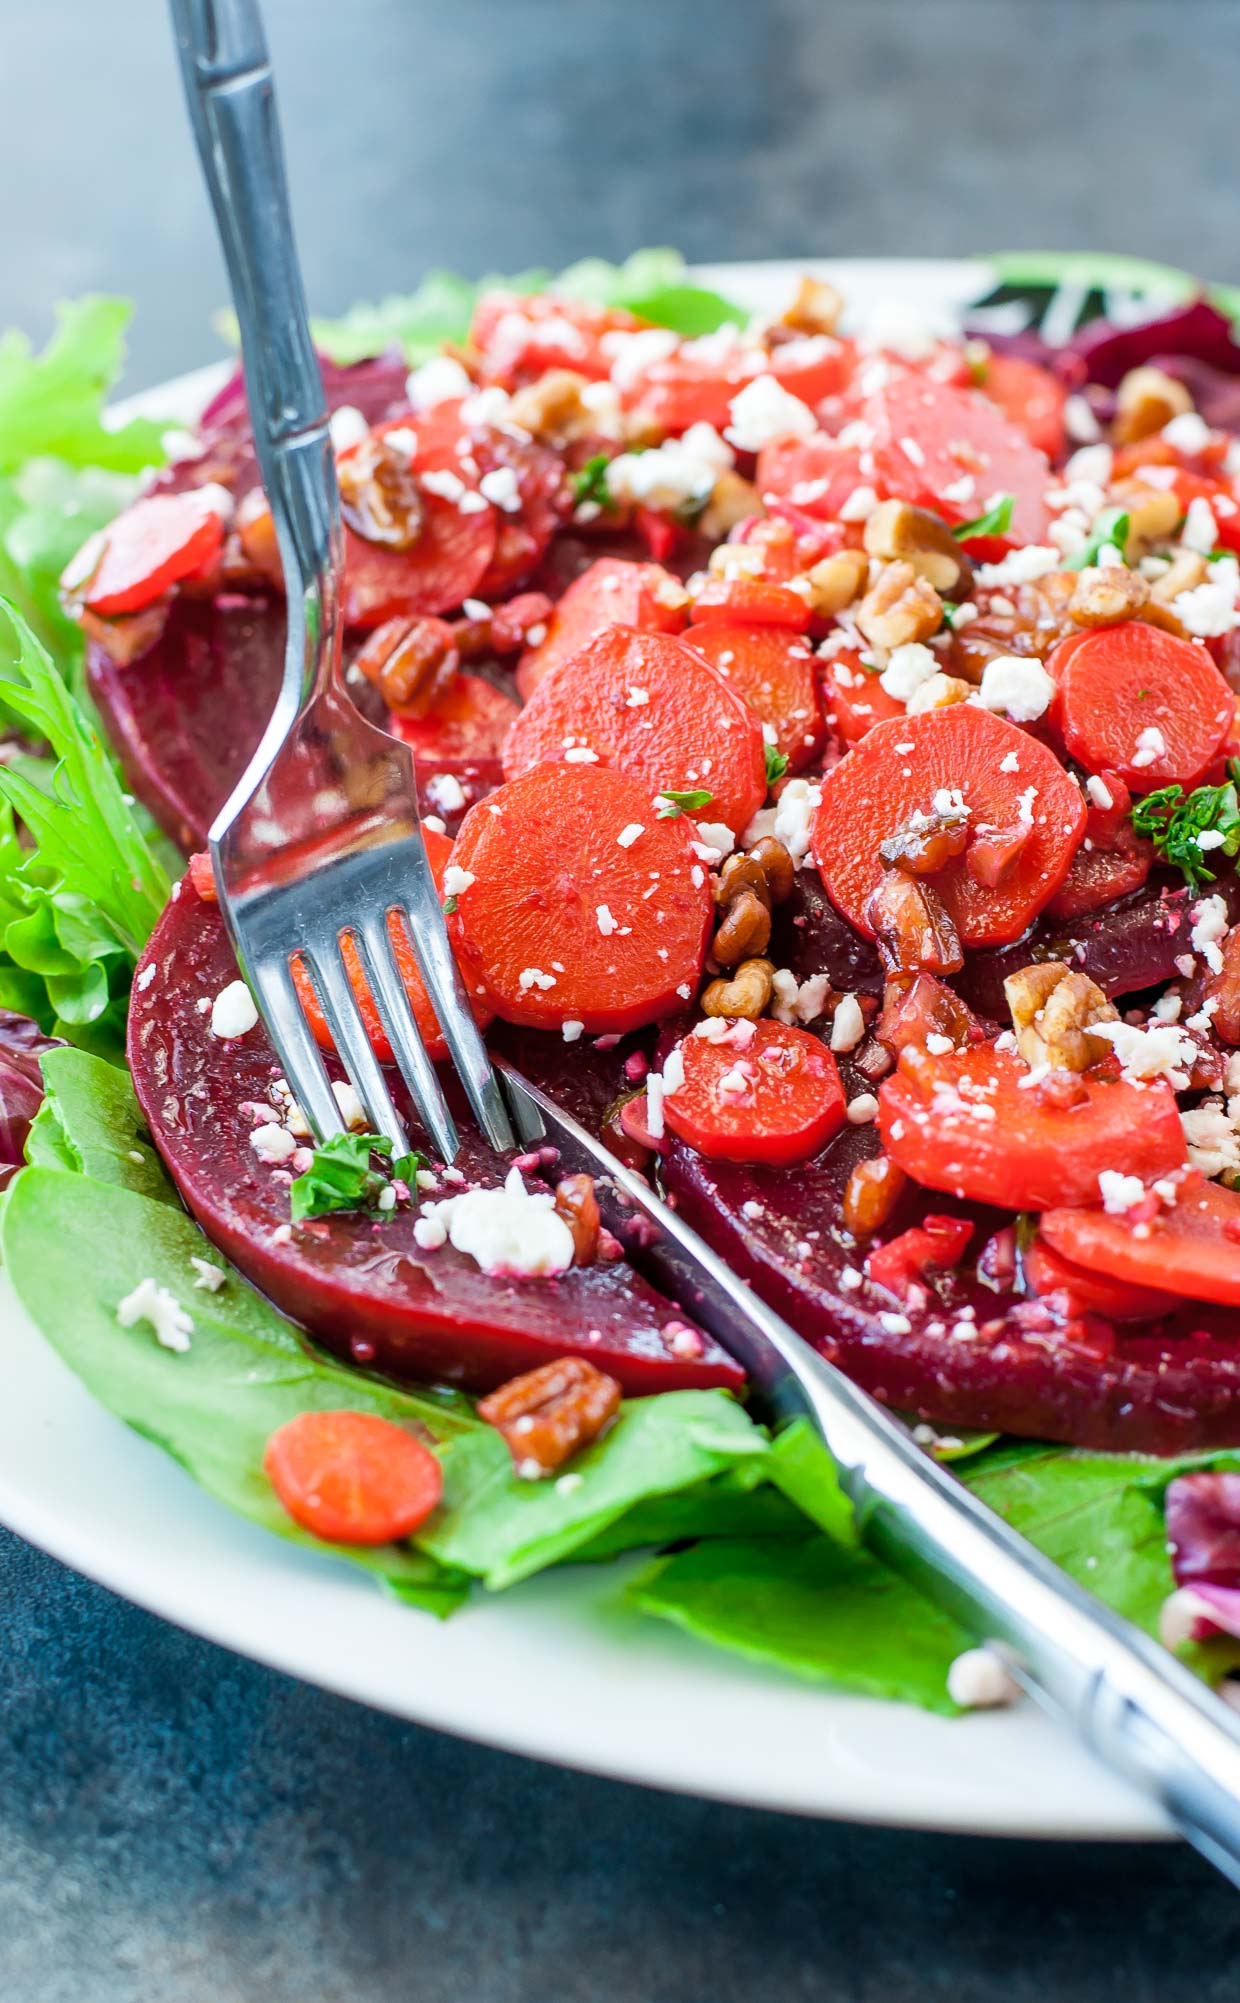 Healthy Warm Carrot Beet Spinach Salad - GF + Vegetarian - Swap out the feta and use clarified butter for a dish that's both paleo friendly and Whole 30 compliant!